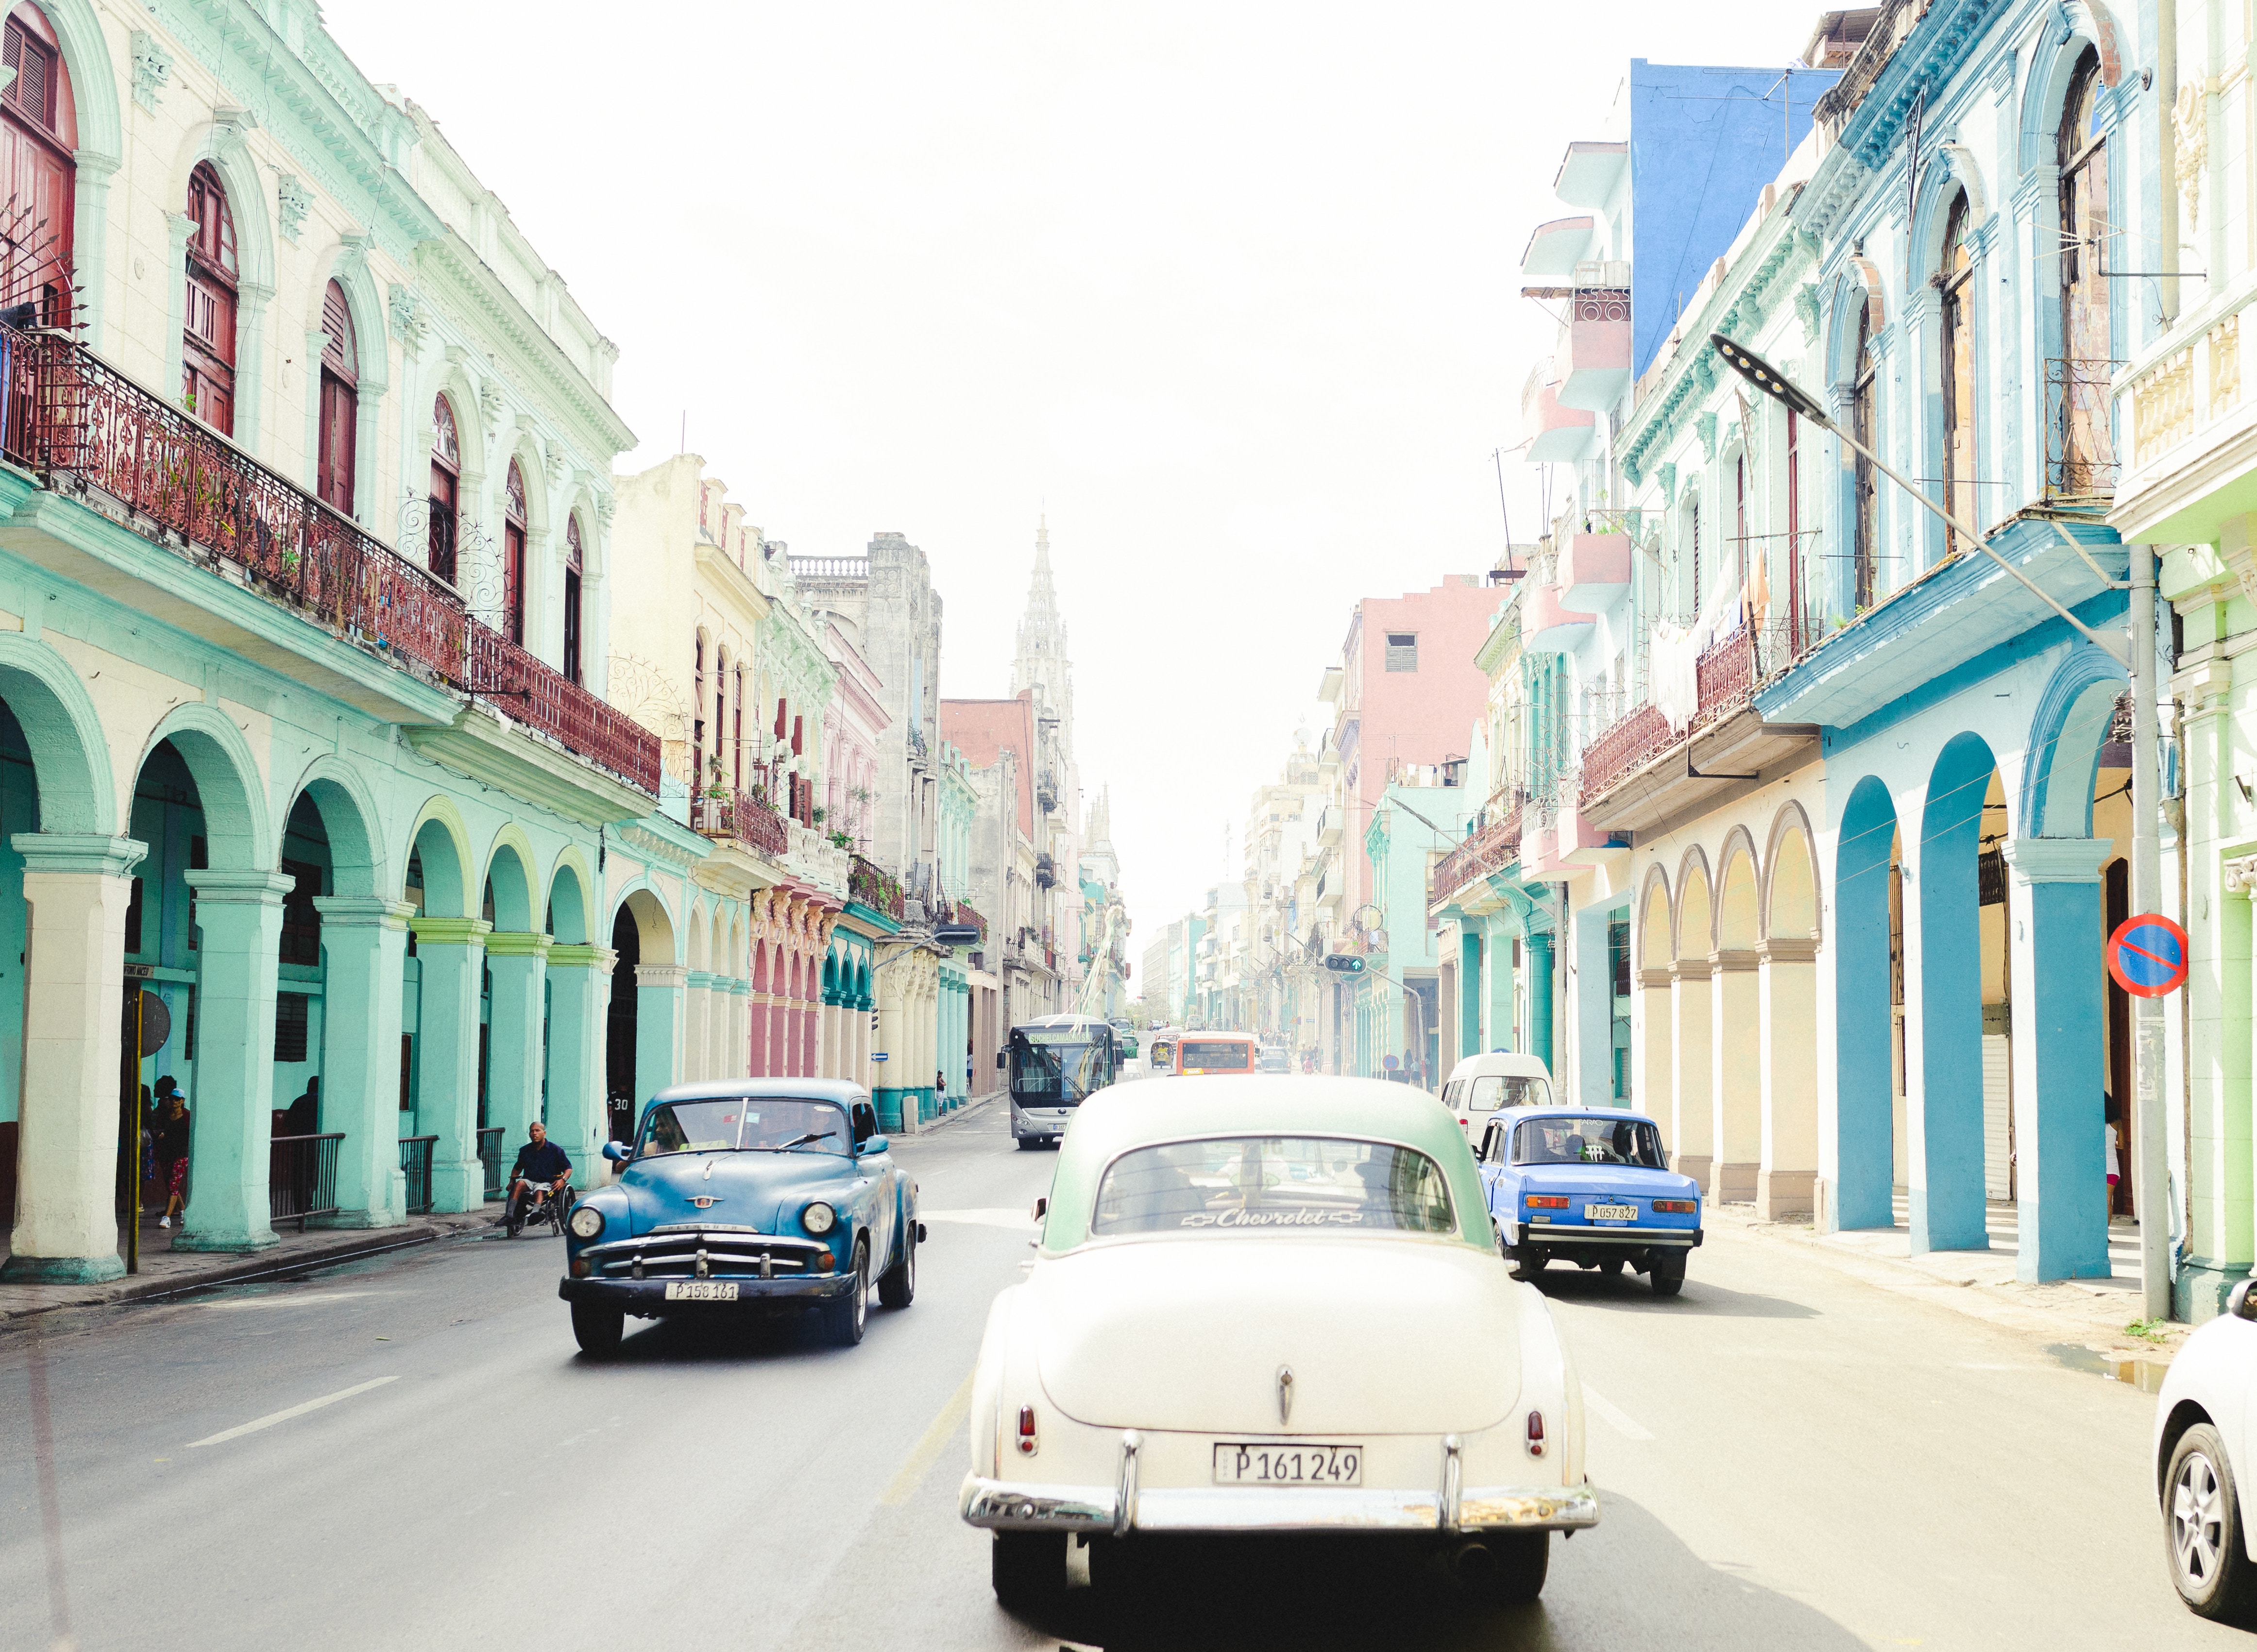 Looking For A Place To Stay In Cuba? Try A 'Casa Particular'